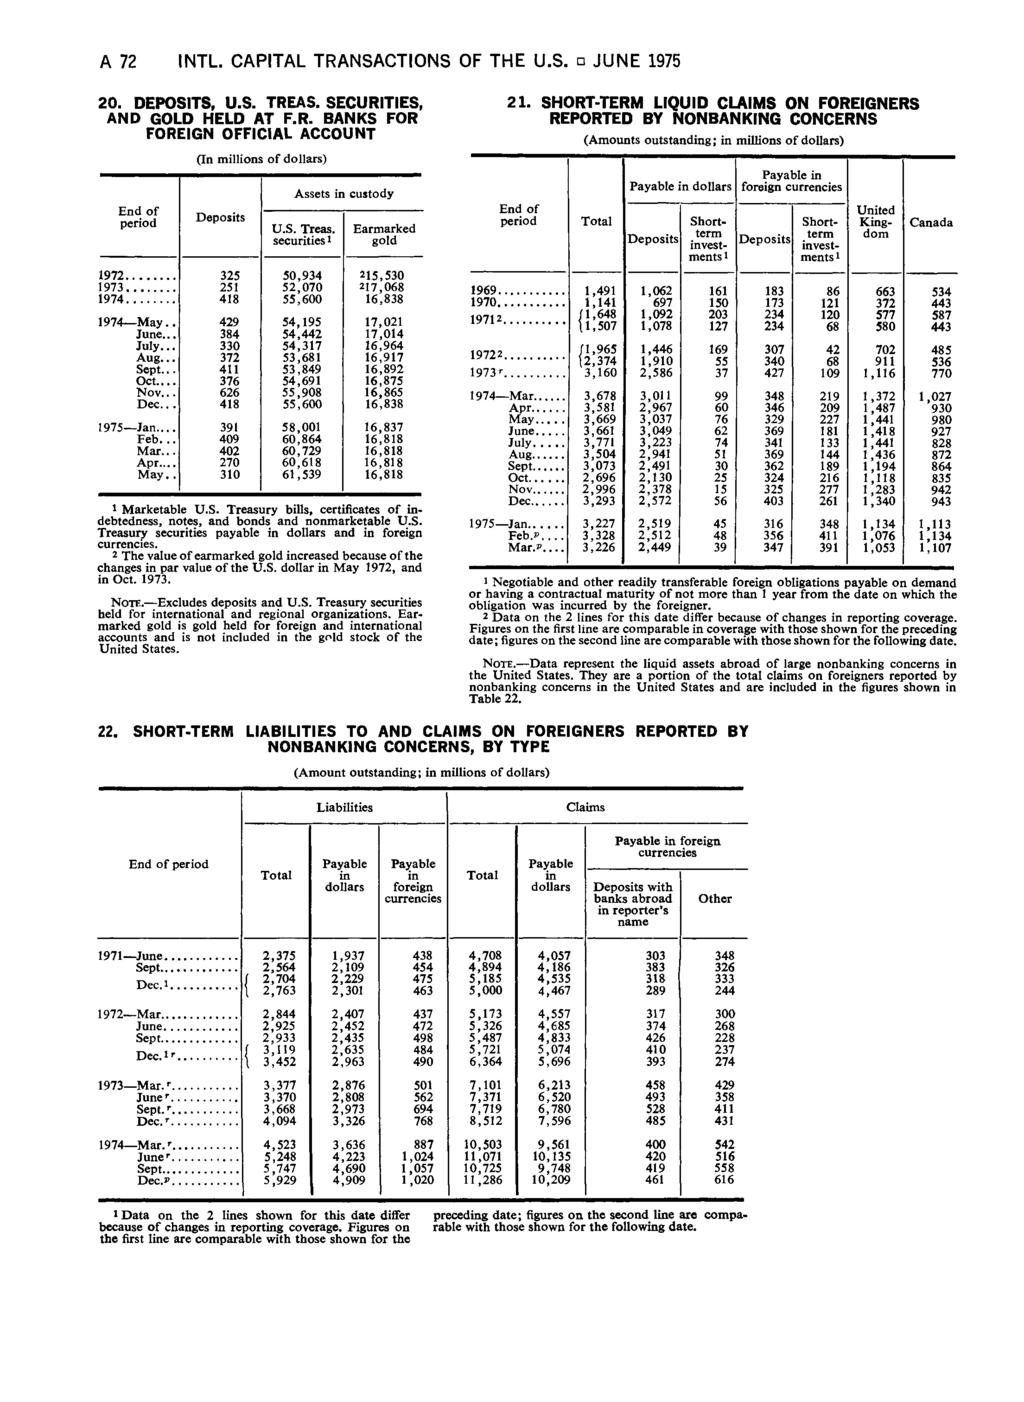 INTL. CAPITAL TRANSACTIONS OF THE U.S. JUNE 1975 2 0. D E PO SIT S, U.S. TREAS. SEC U R ITIES, AND GOLD HELD AT F.R. BANKS FOR FOREIGN OFFICIAL ACCOUNT 197 2 197 3 197 4 End of period 1974 May. June.